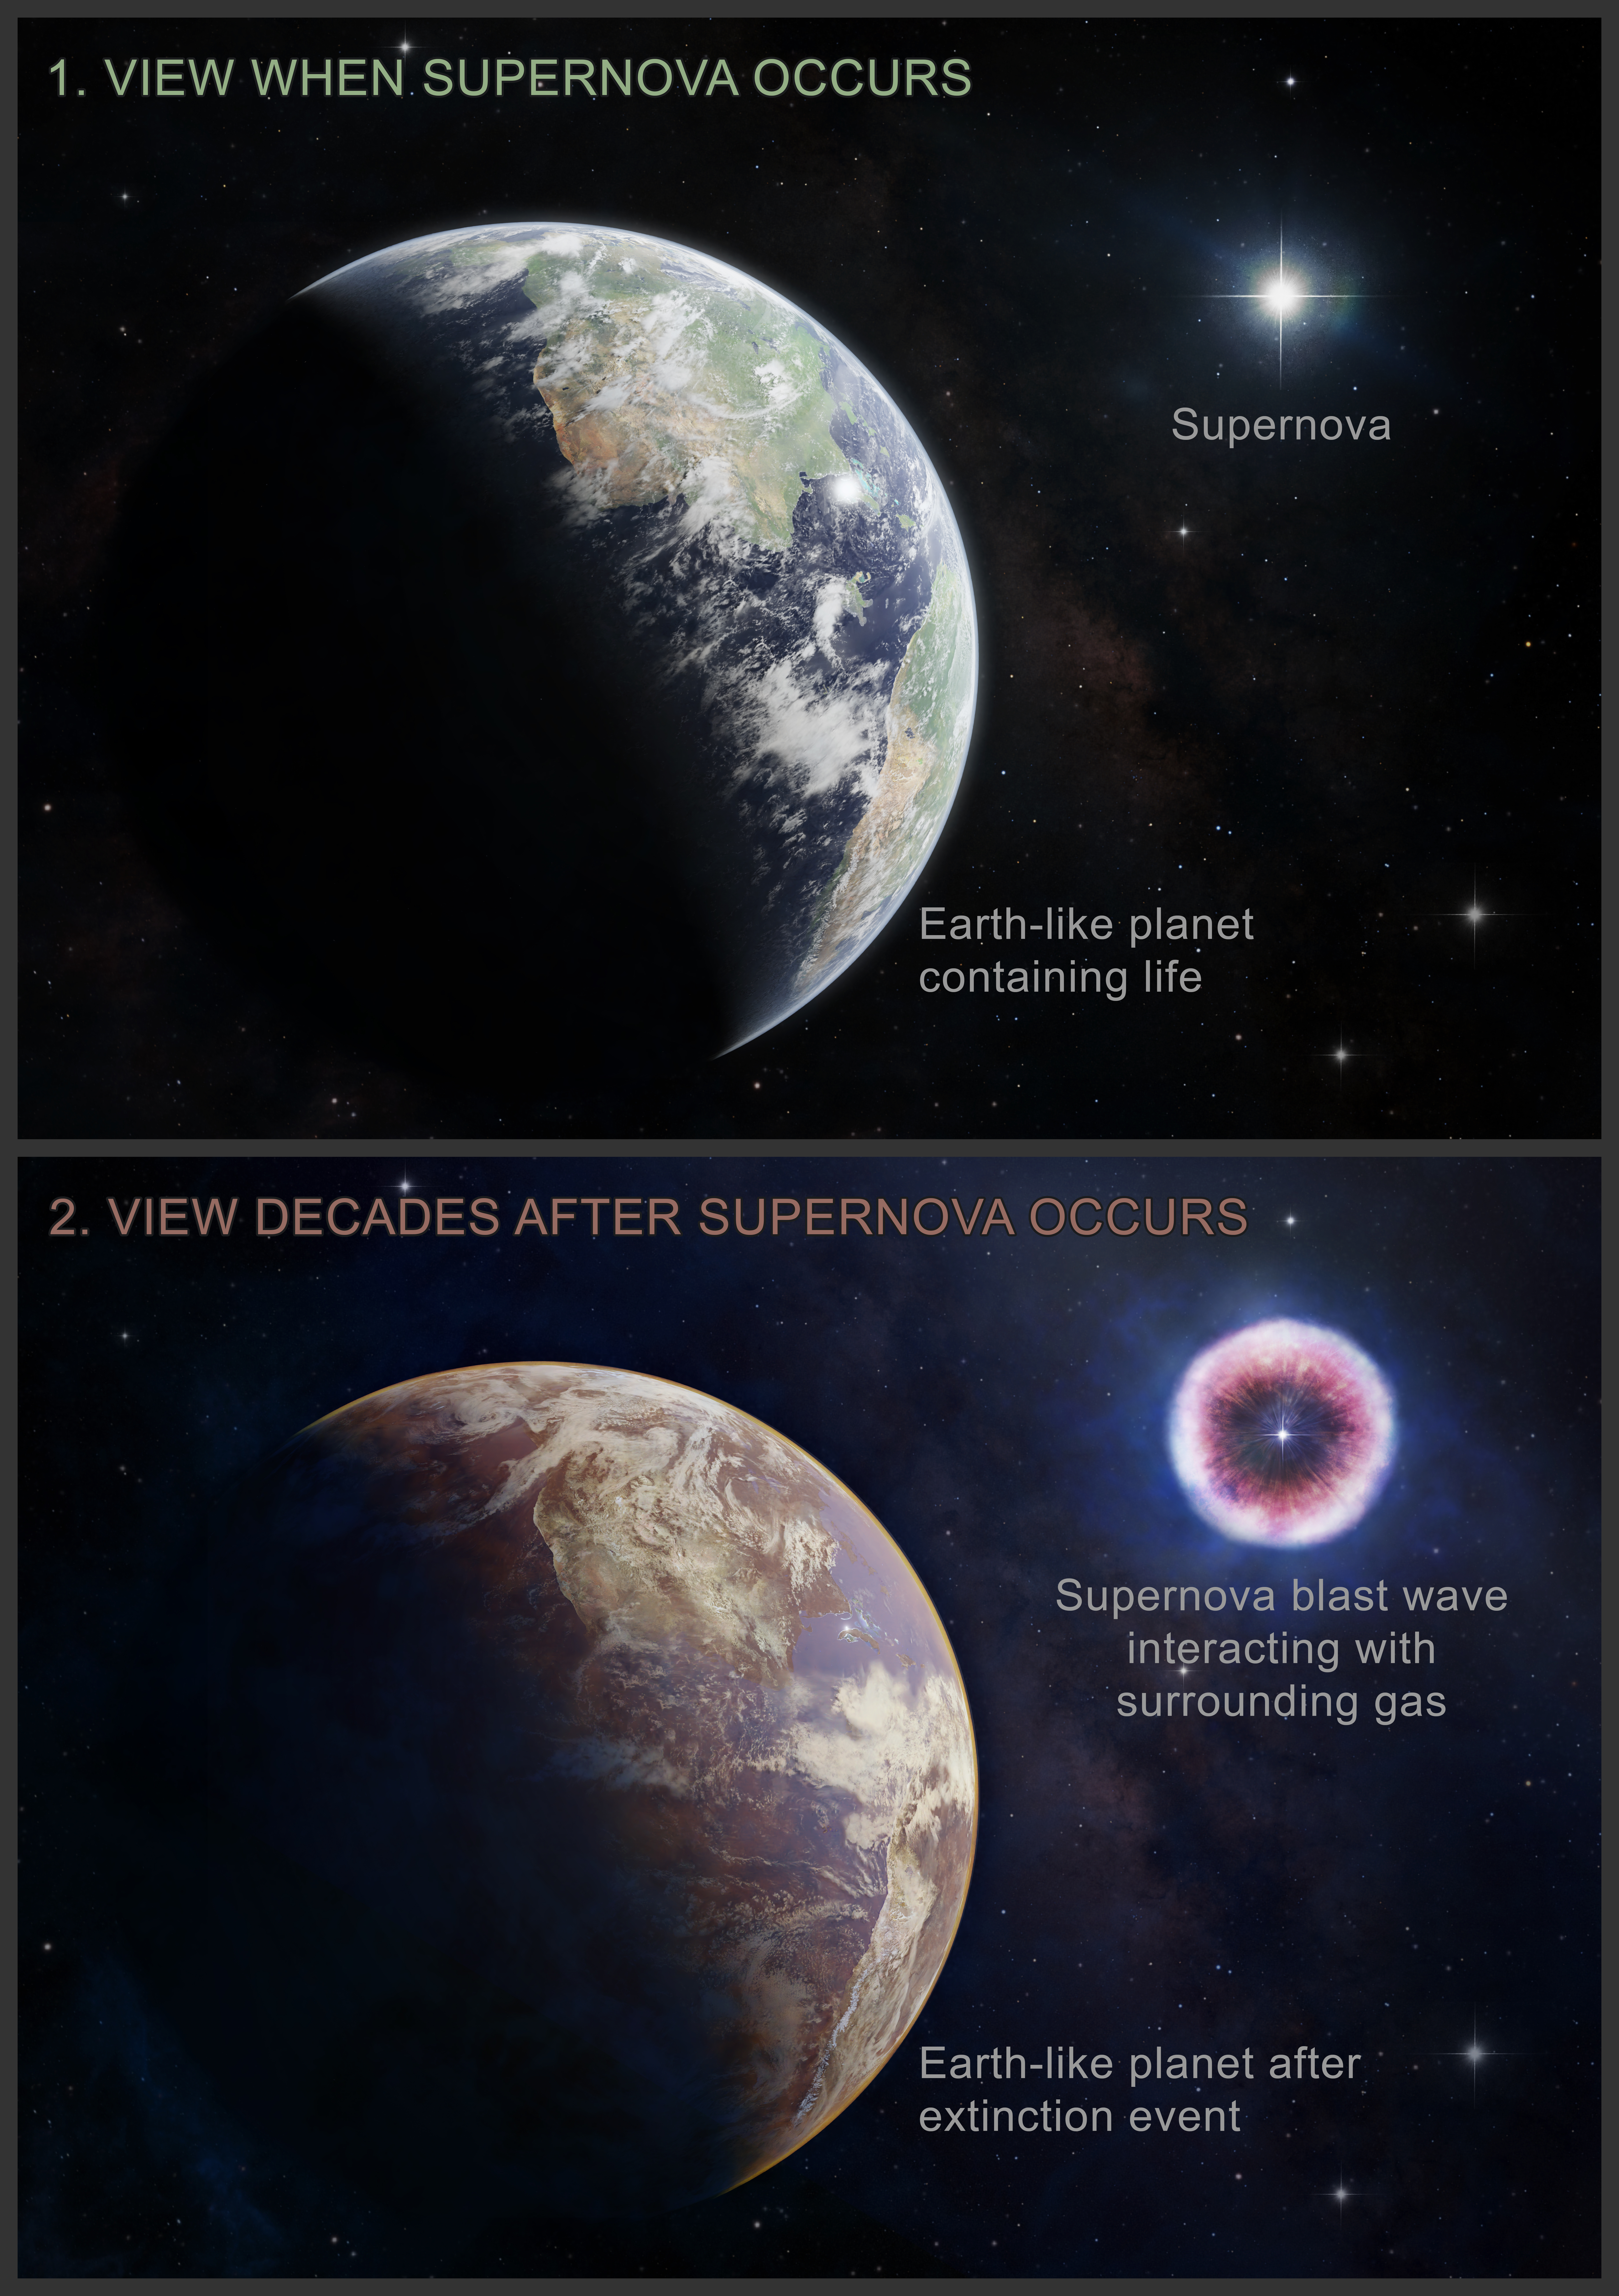 Illustration of an Earth-like planet before and after radiation exposure.